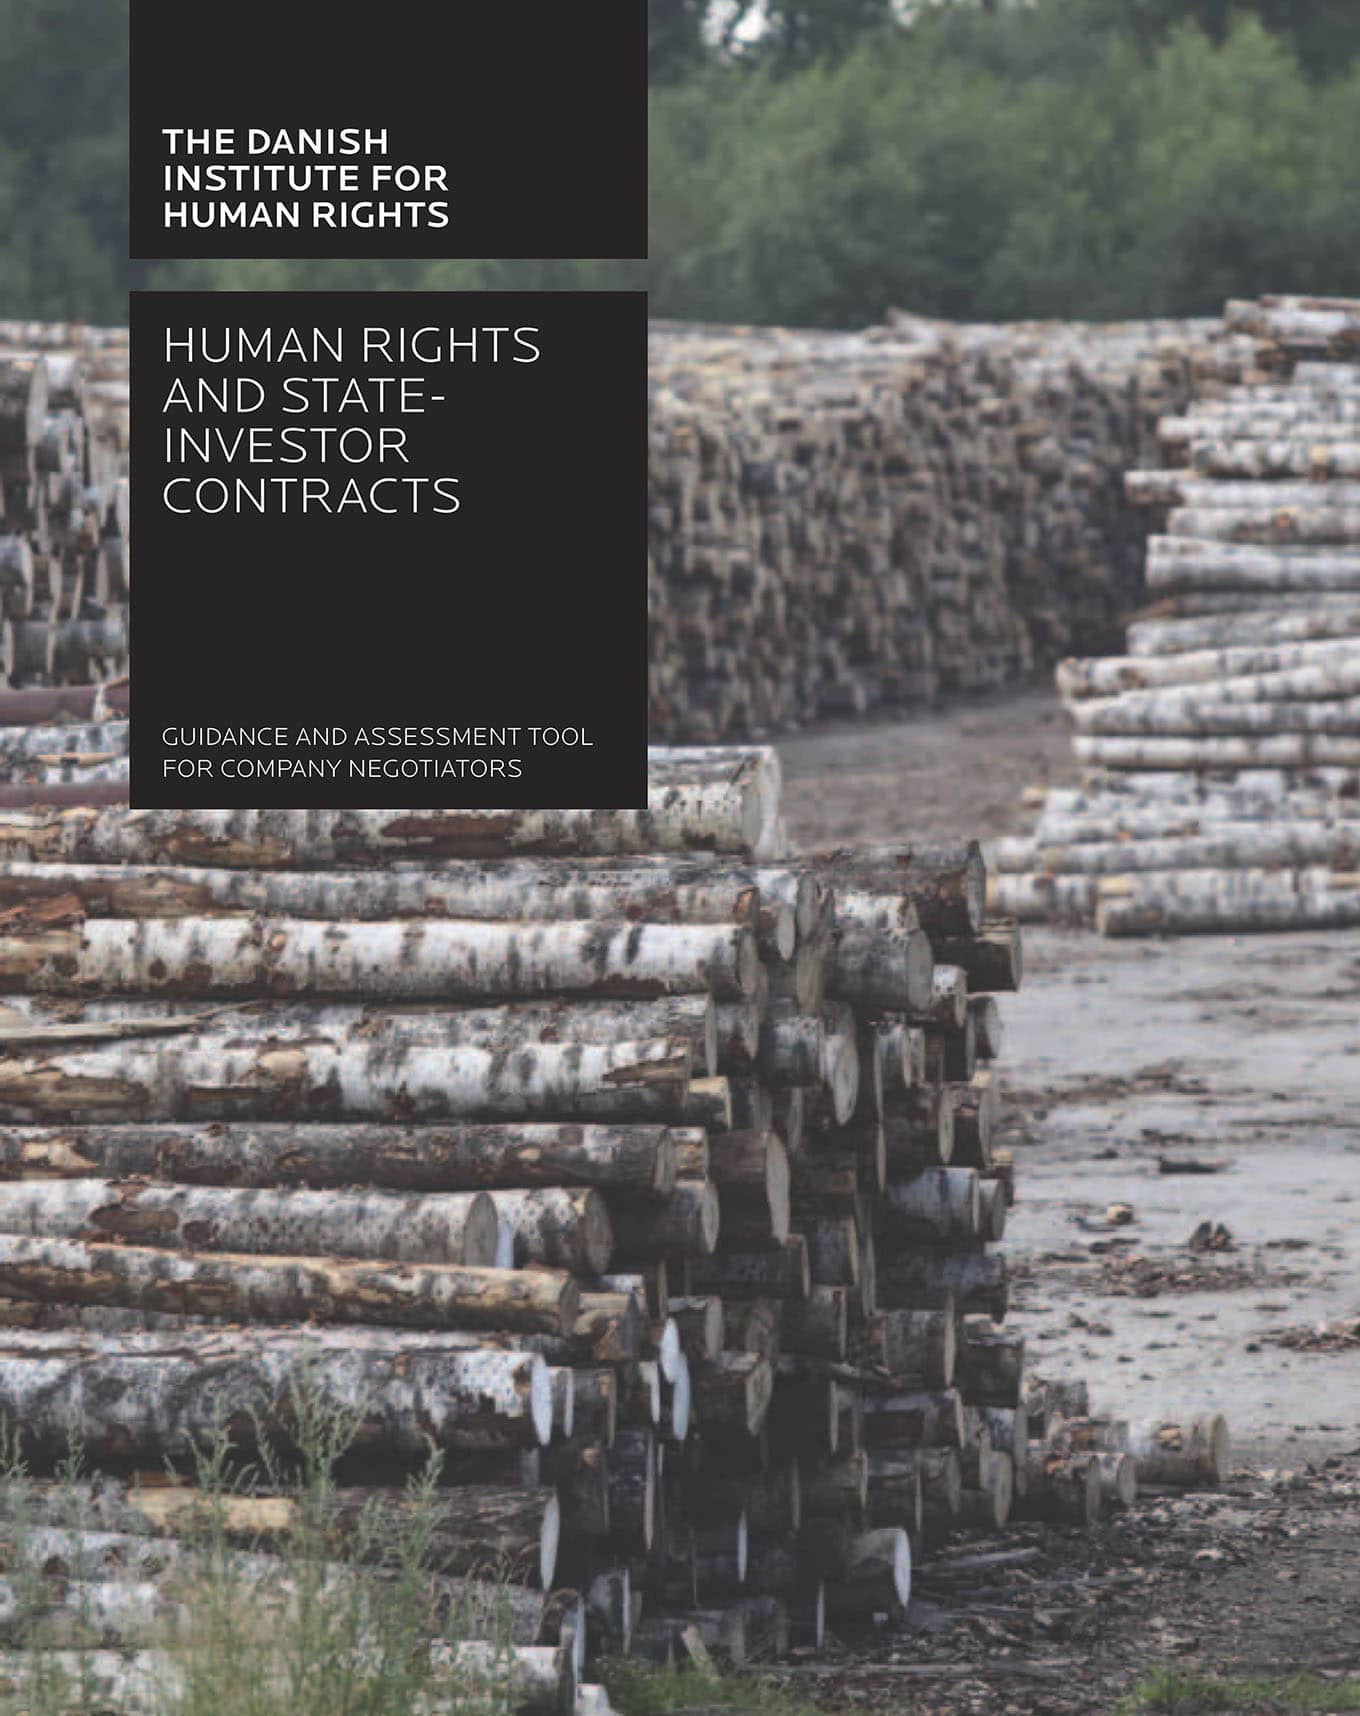 Human Rights and State-Investor Contracts: Guidance and Assessment Tool for Company Negotiators (DIHR, 2014)